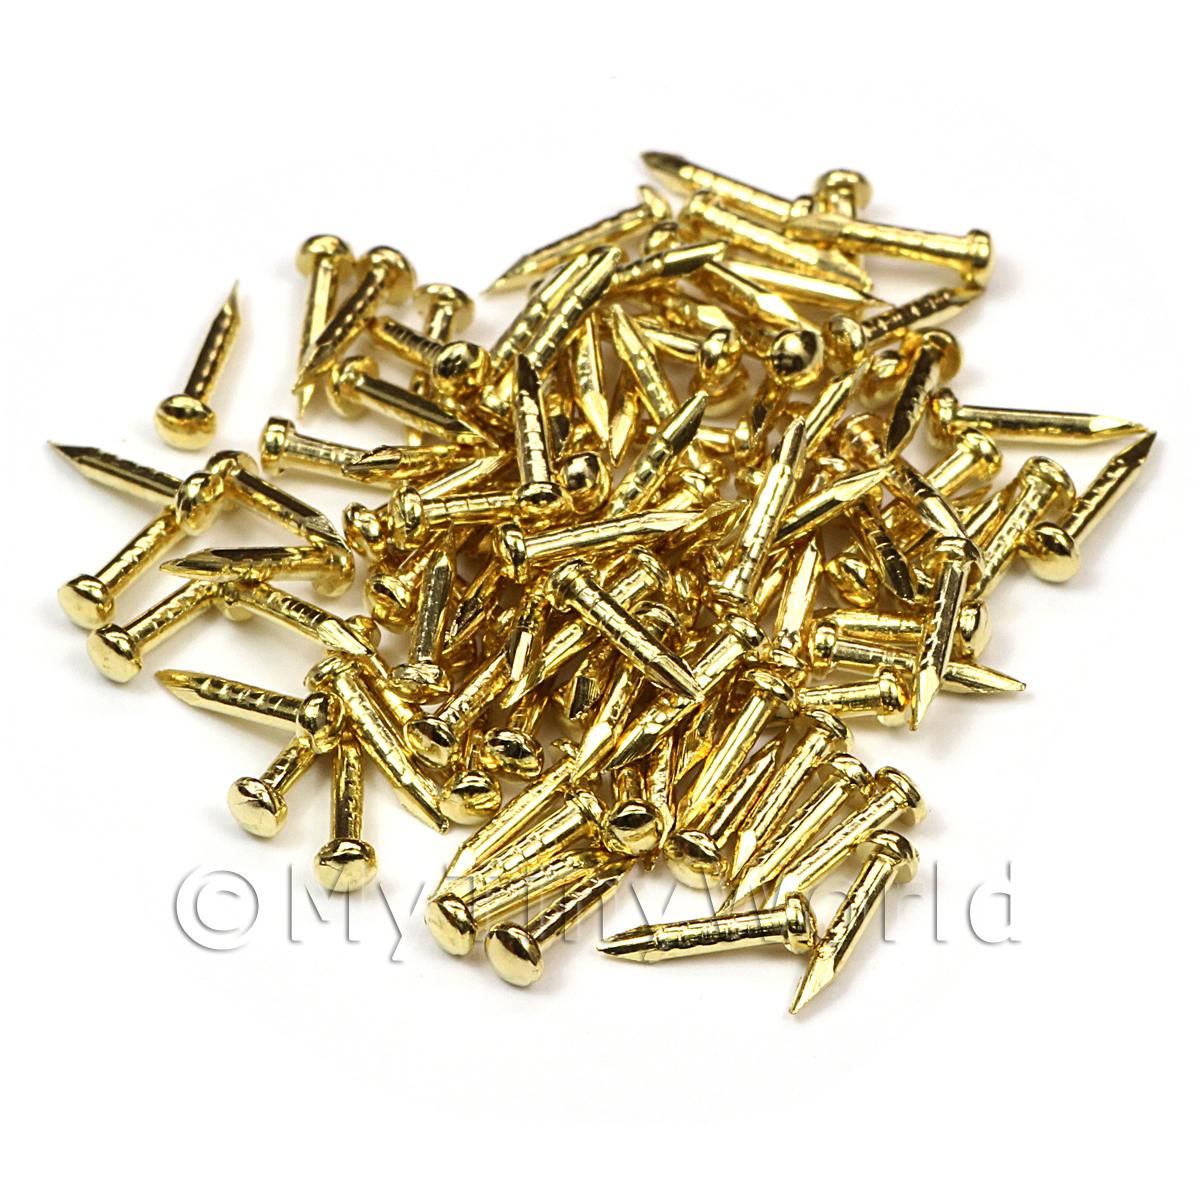 Dolls House Miniature Antique Brass Nail 100 pack 